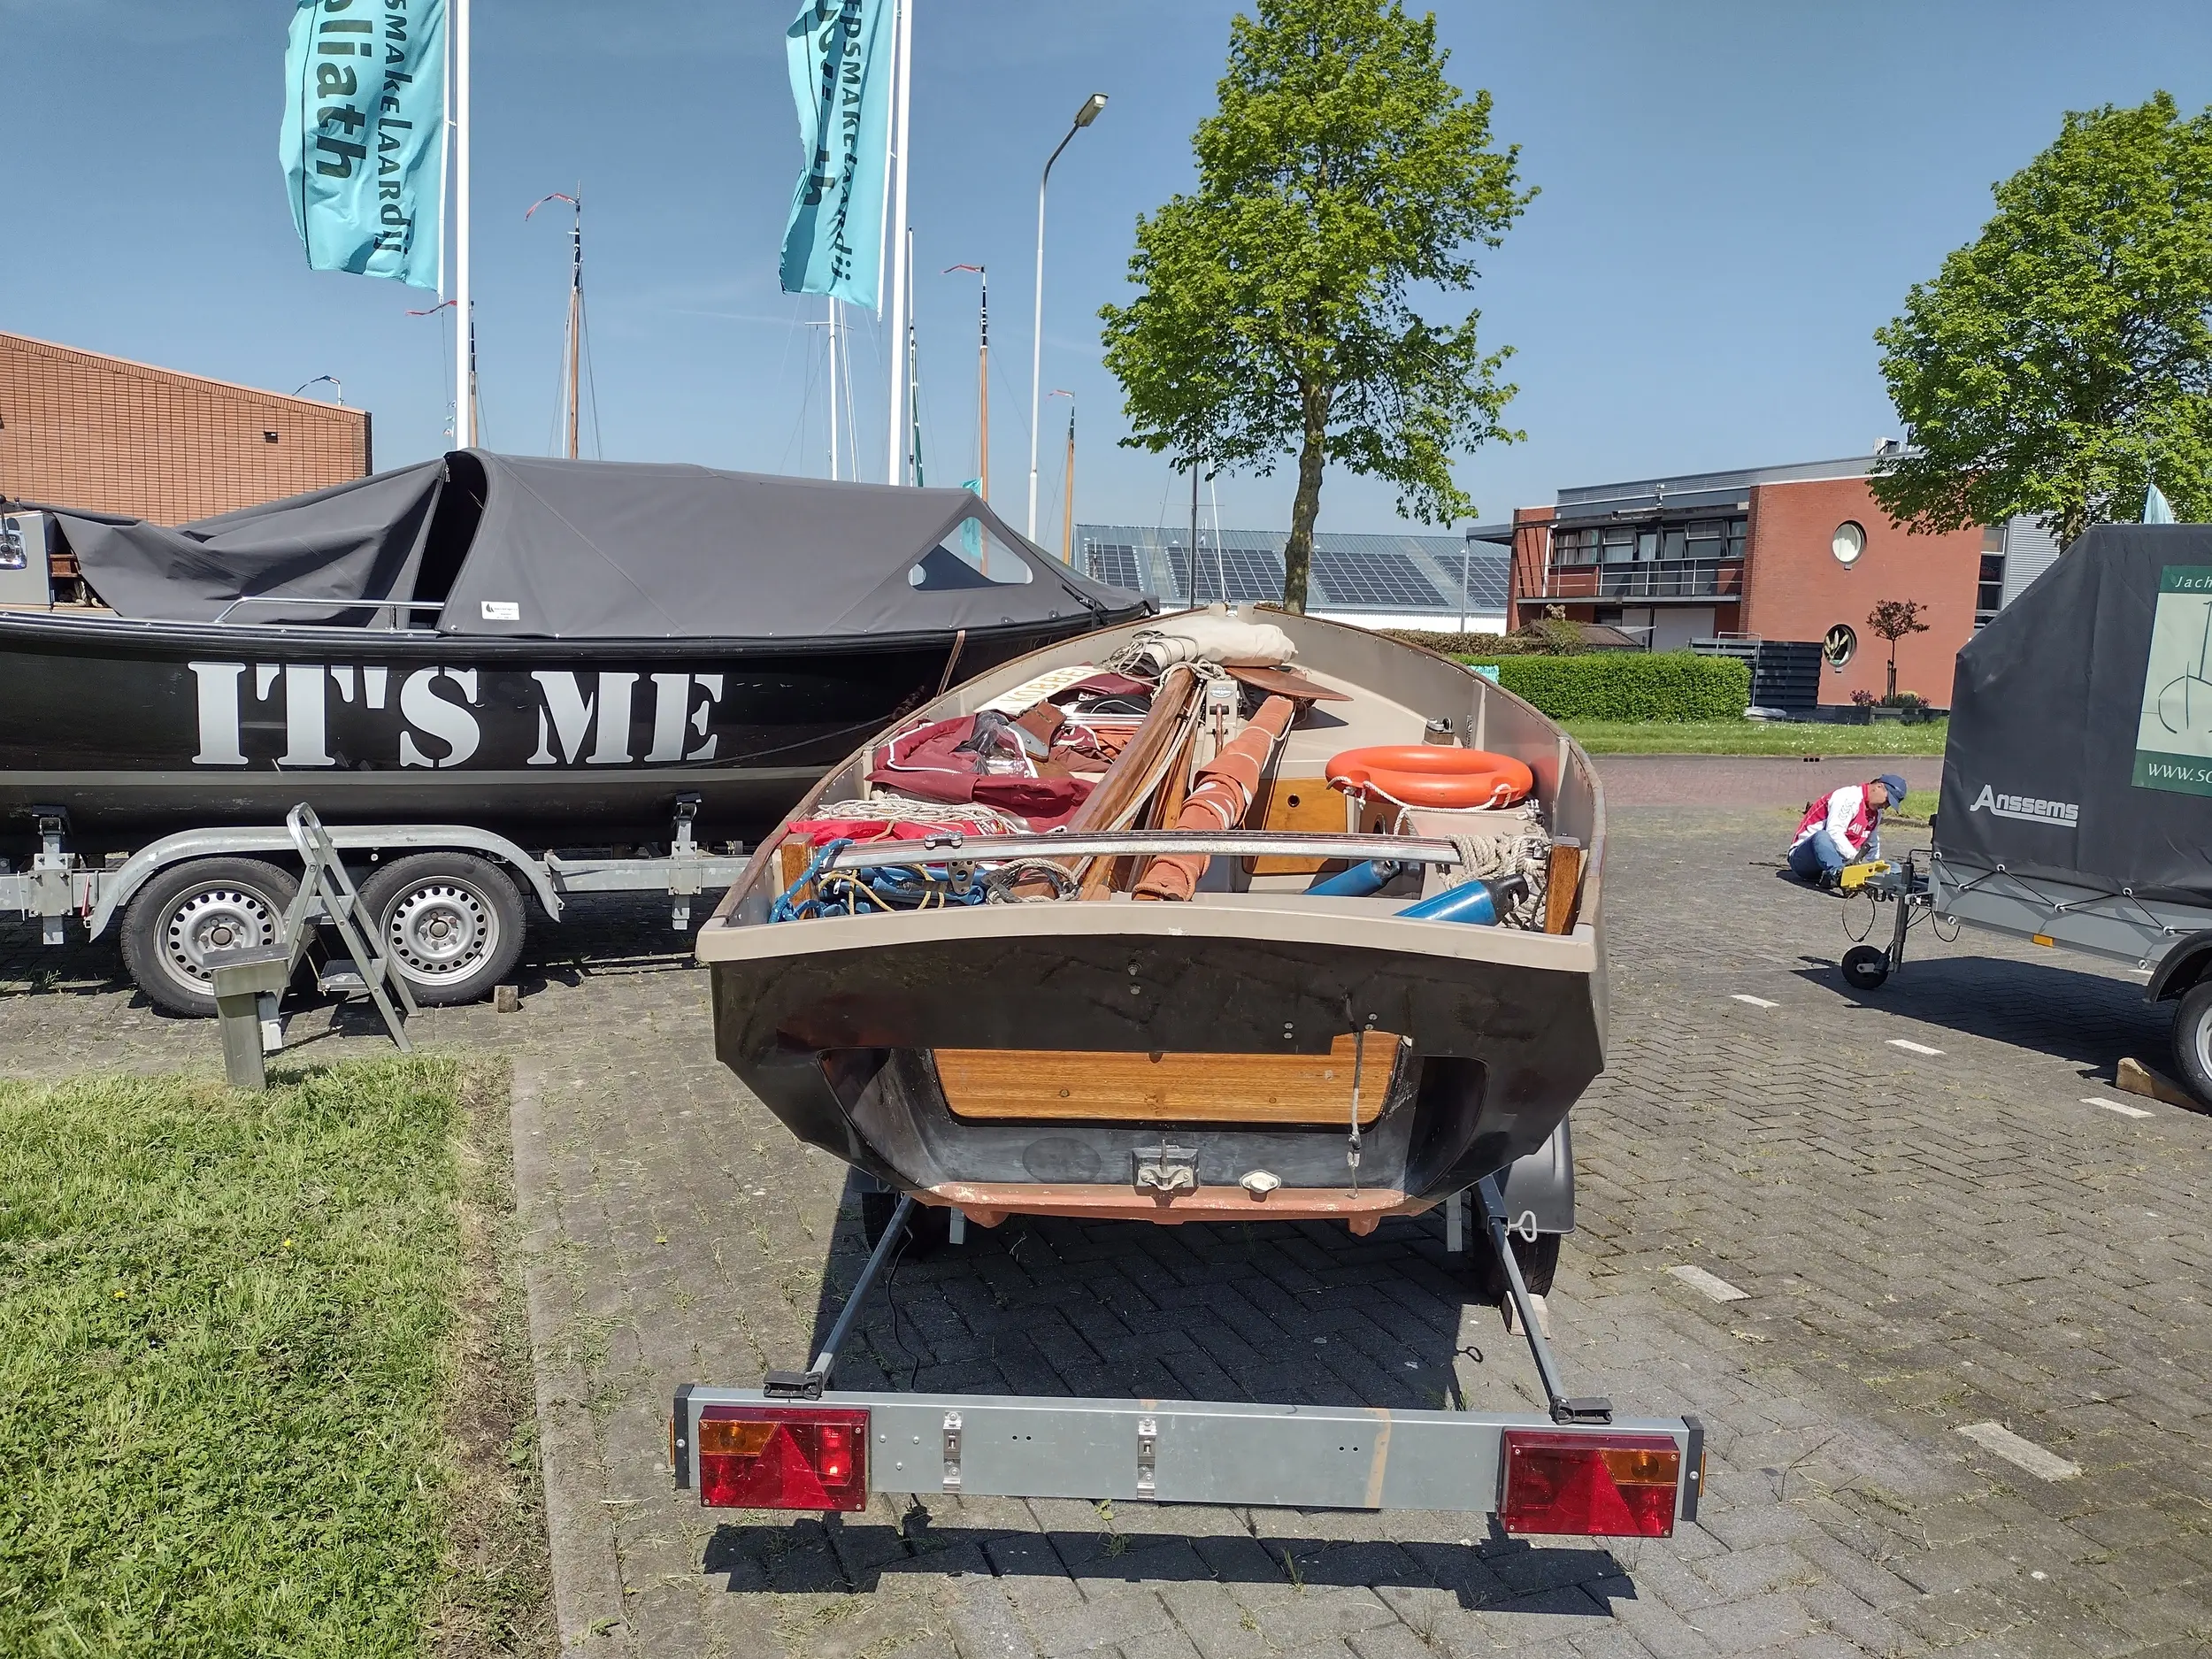 1980 Tradition coble (met trailer)